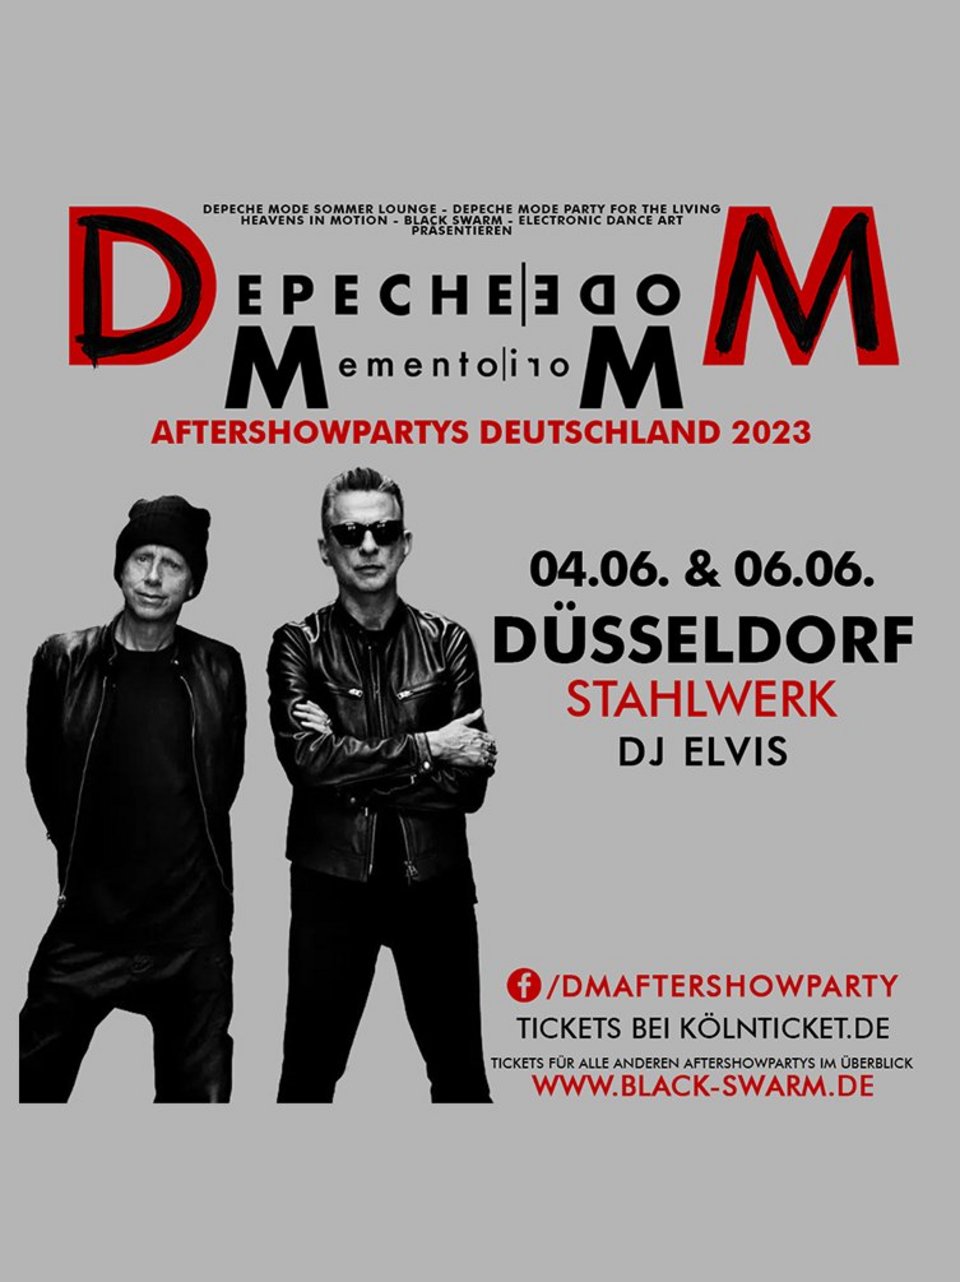 Depeche Mode Aftershowparty